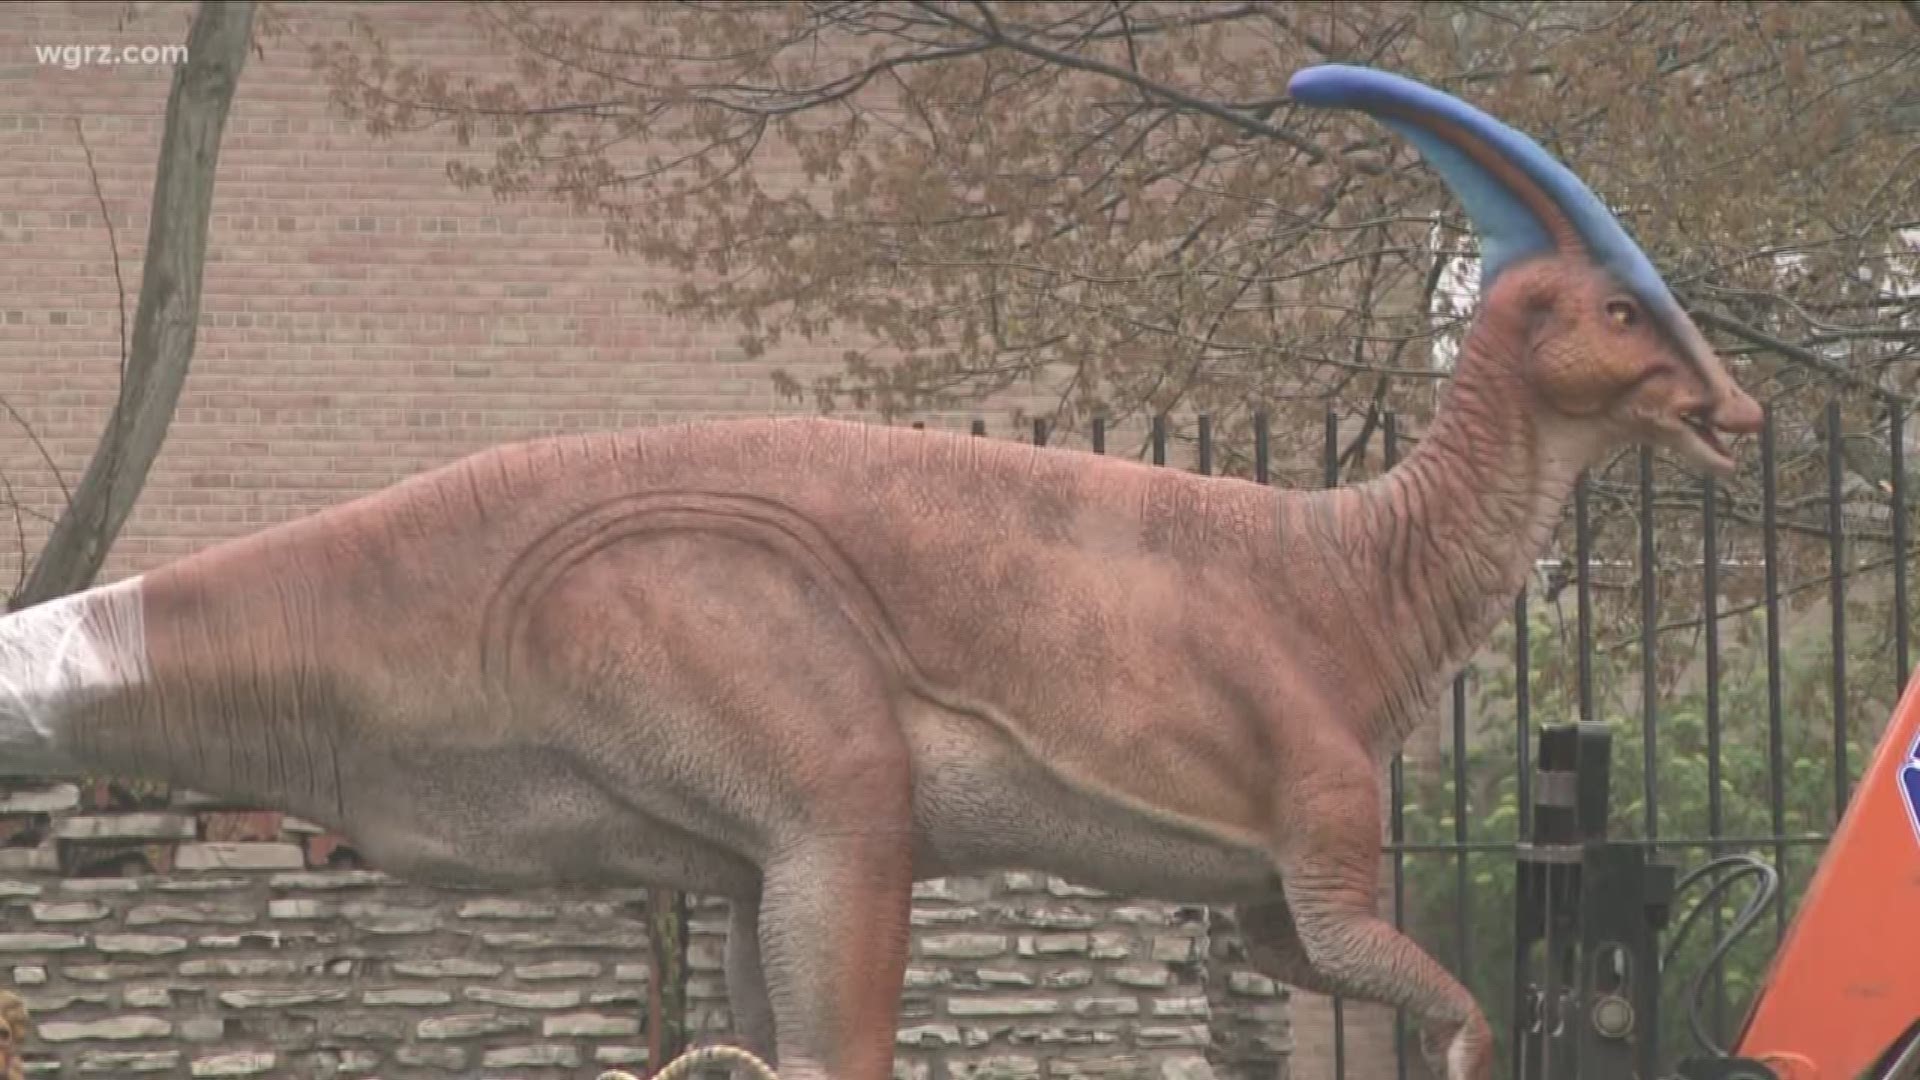 OMG DINOSAURS OPENS WILL BE ON DISPLAY STARTING THIS SATURDAY MORNING, THROUGH LABOR DAY